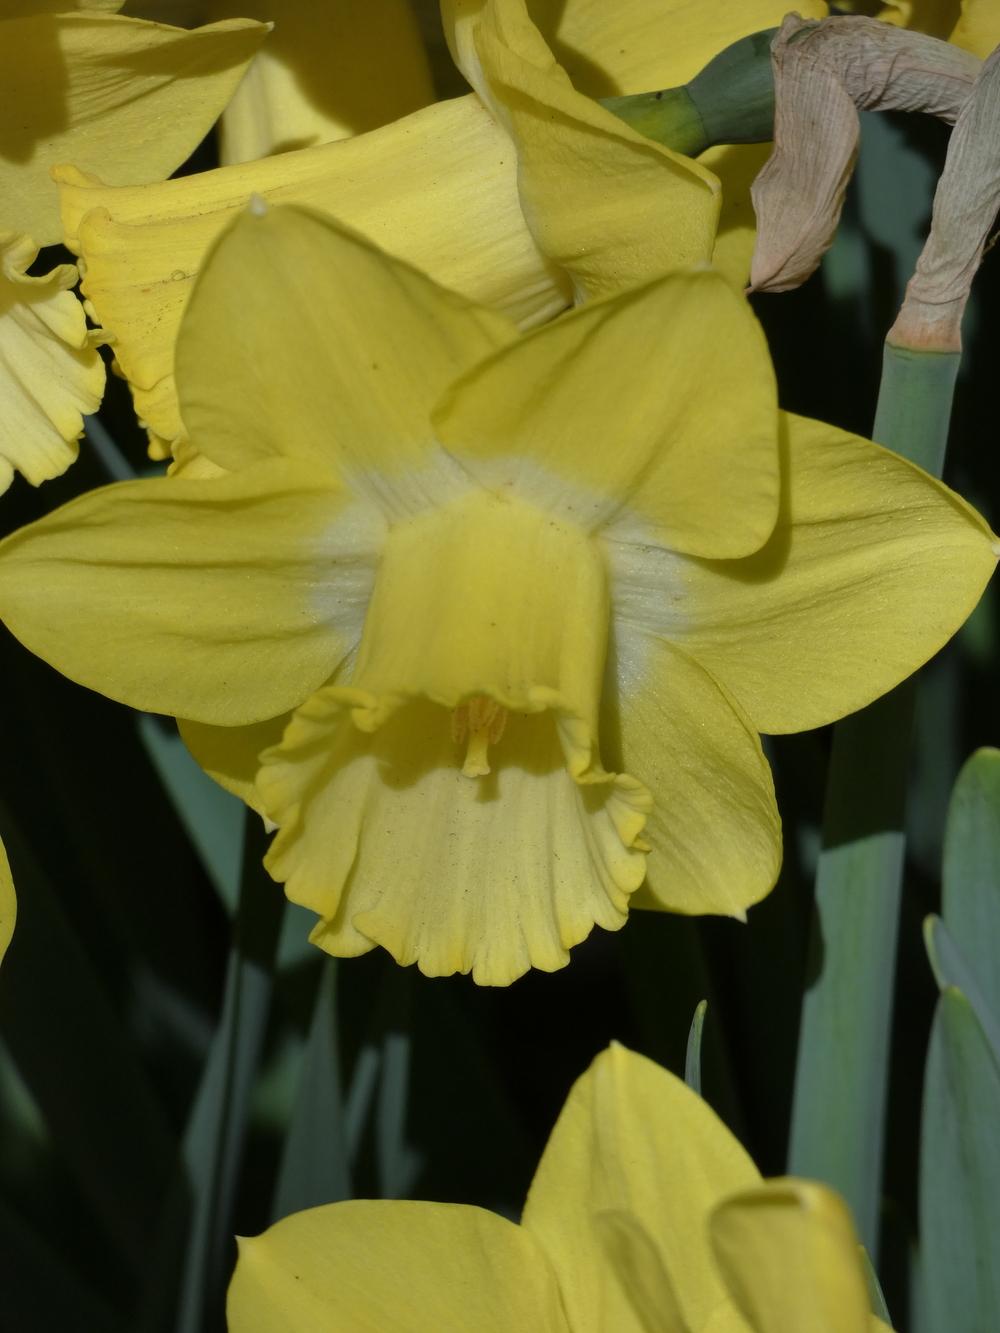 Photo of Trumpet Daffodil (Narcissus 'Sabatini') uploaded by mellielong